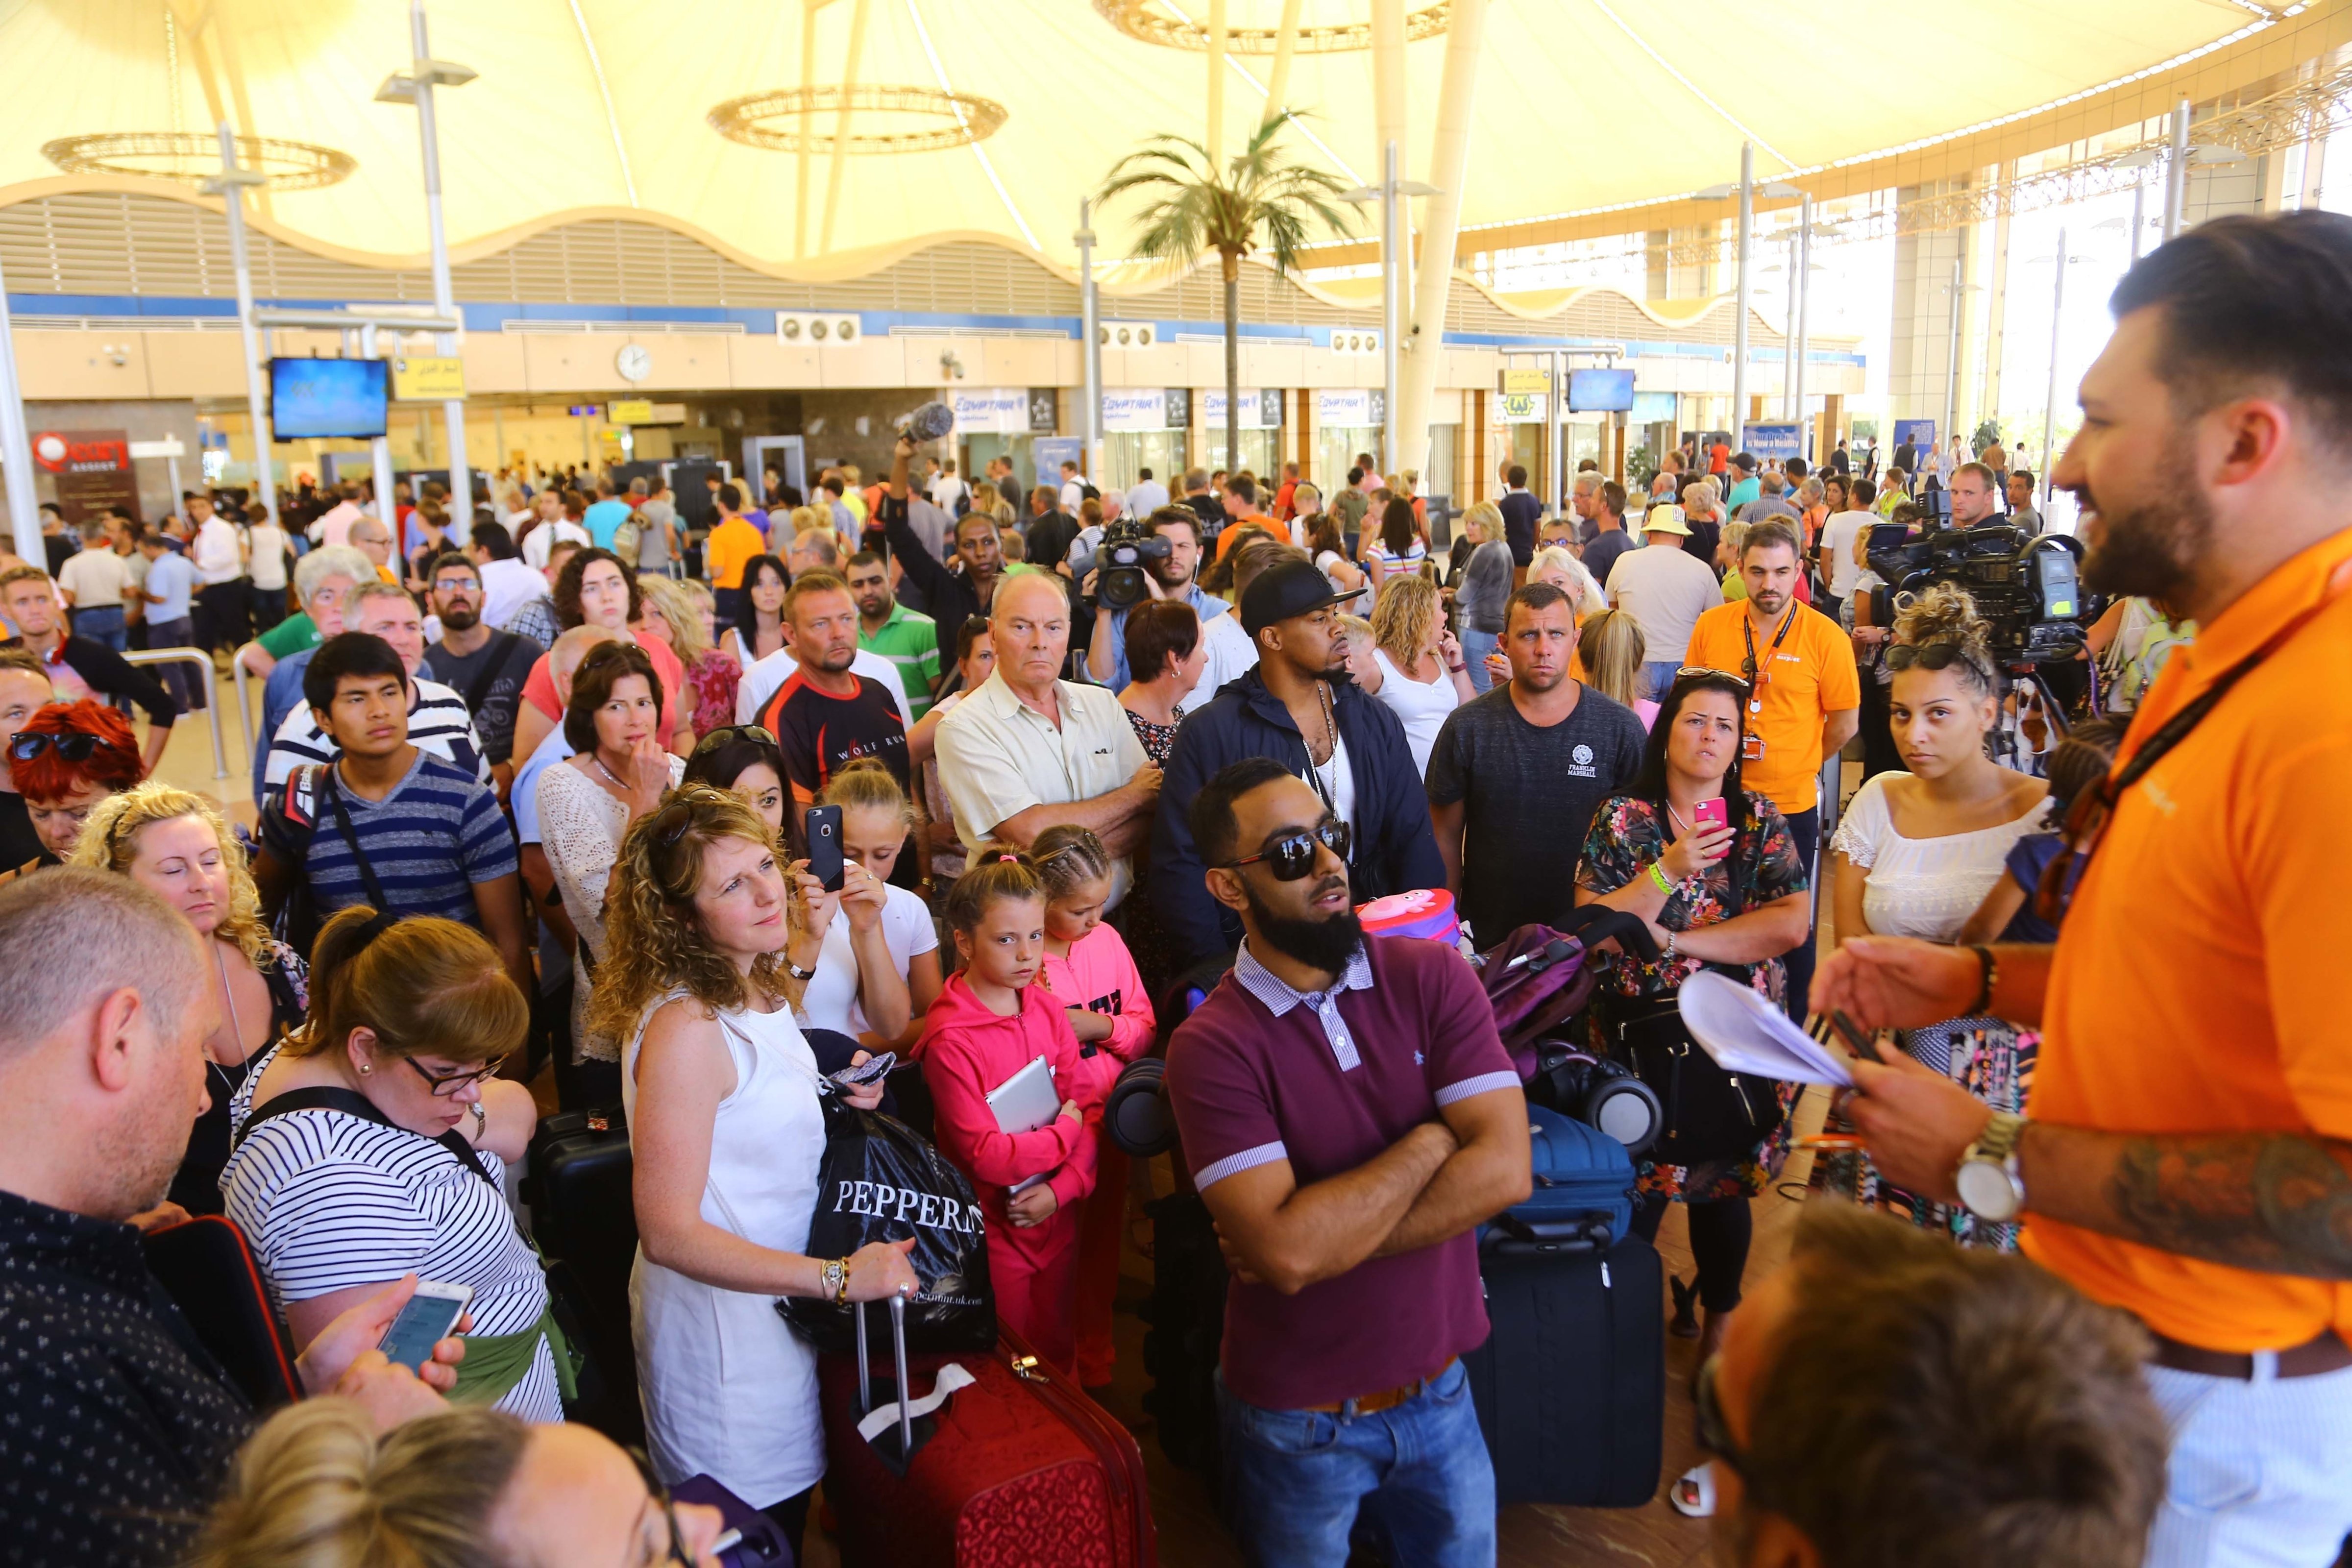 The evacuation begins of British tourists from Egypt's Sharm el-Sheikh Airport on Nov. 6, 2015. They had been stranded for security reasons since the crash of Metrojet Flight 9268 on Oct. 31 (Anadolu Agency—Getty Images)